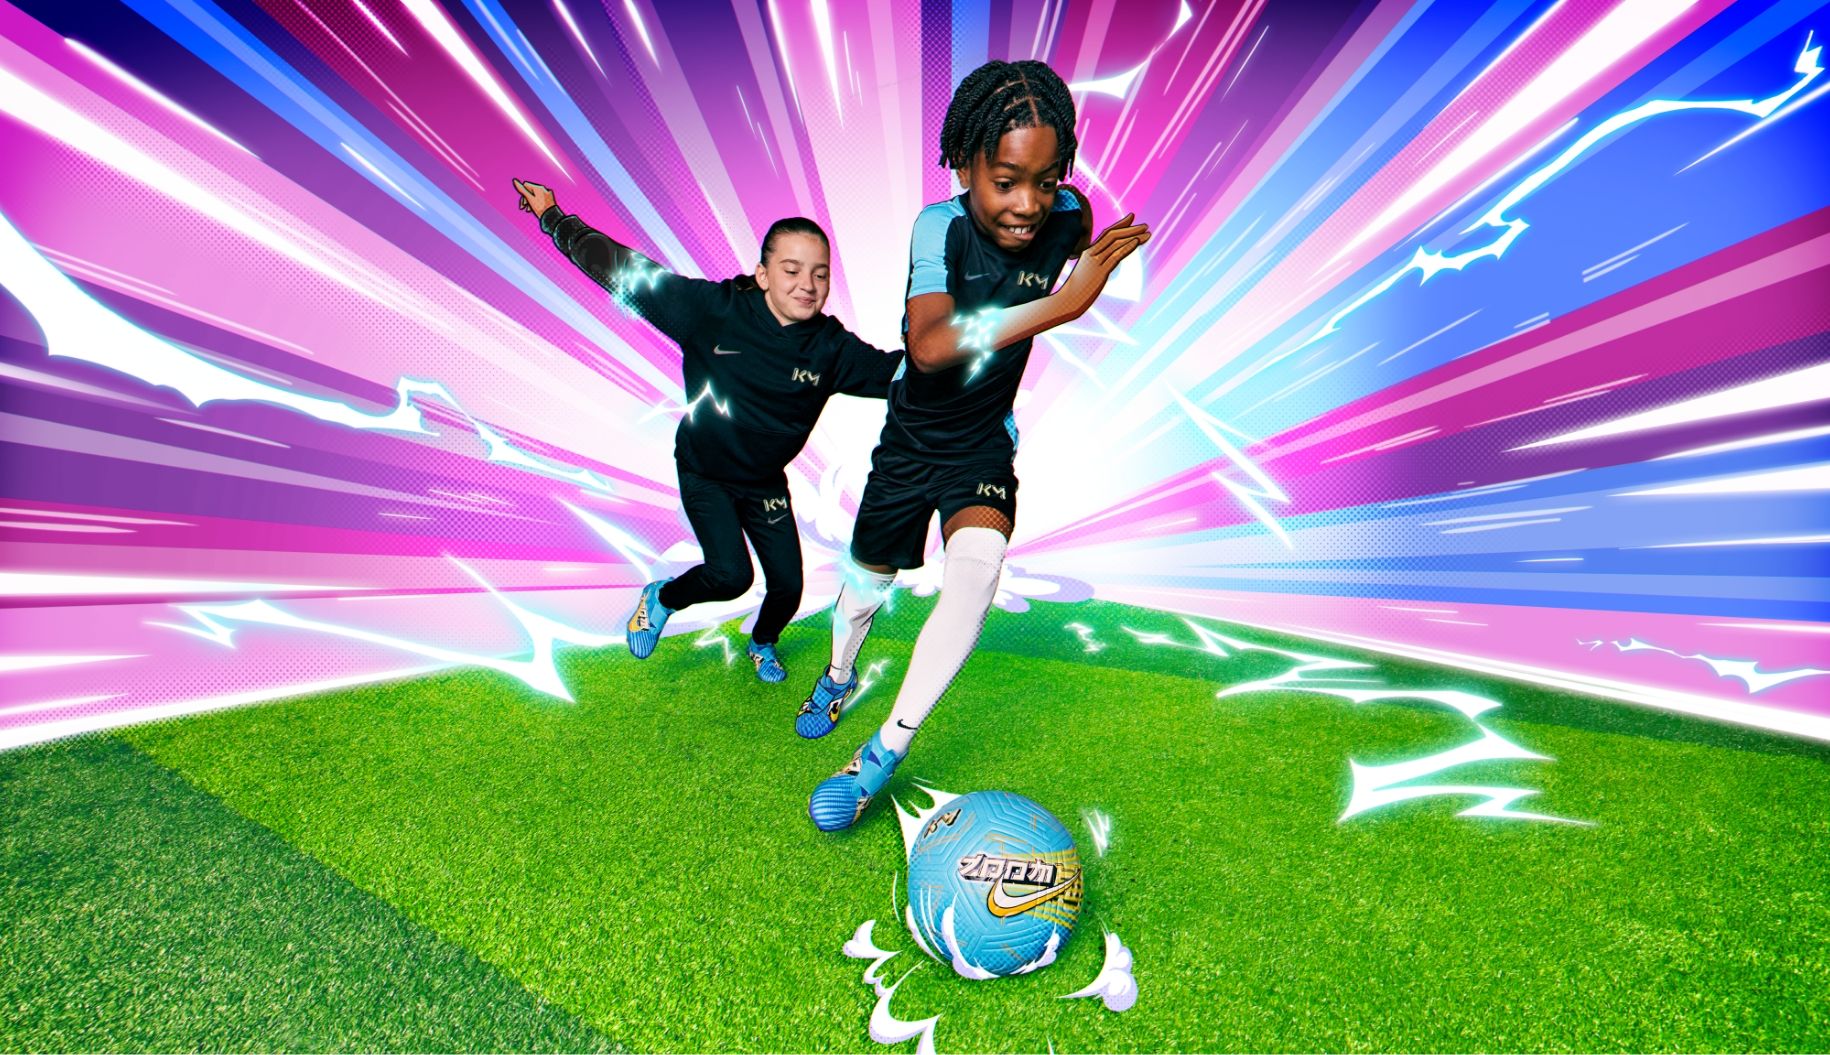 2 children play soccer. Background is illustrated speed lines and lightning